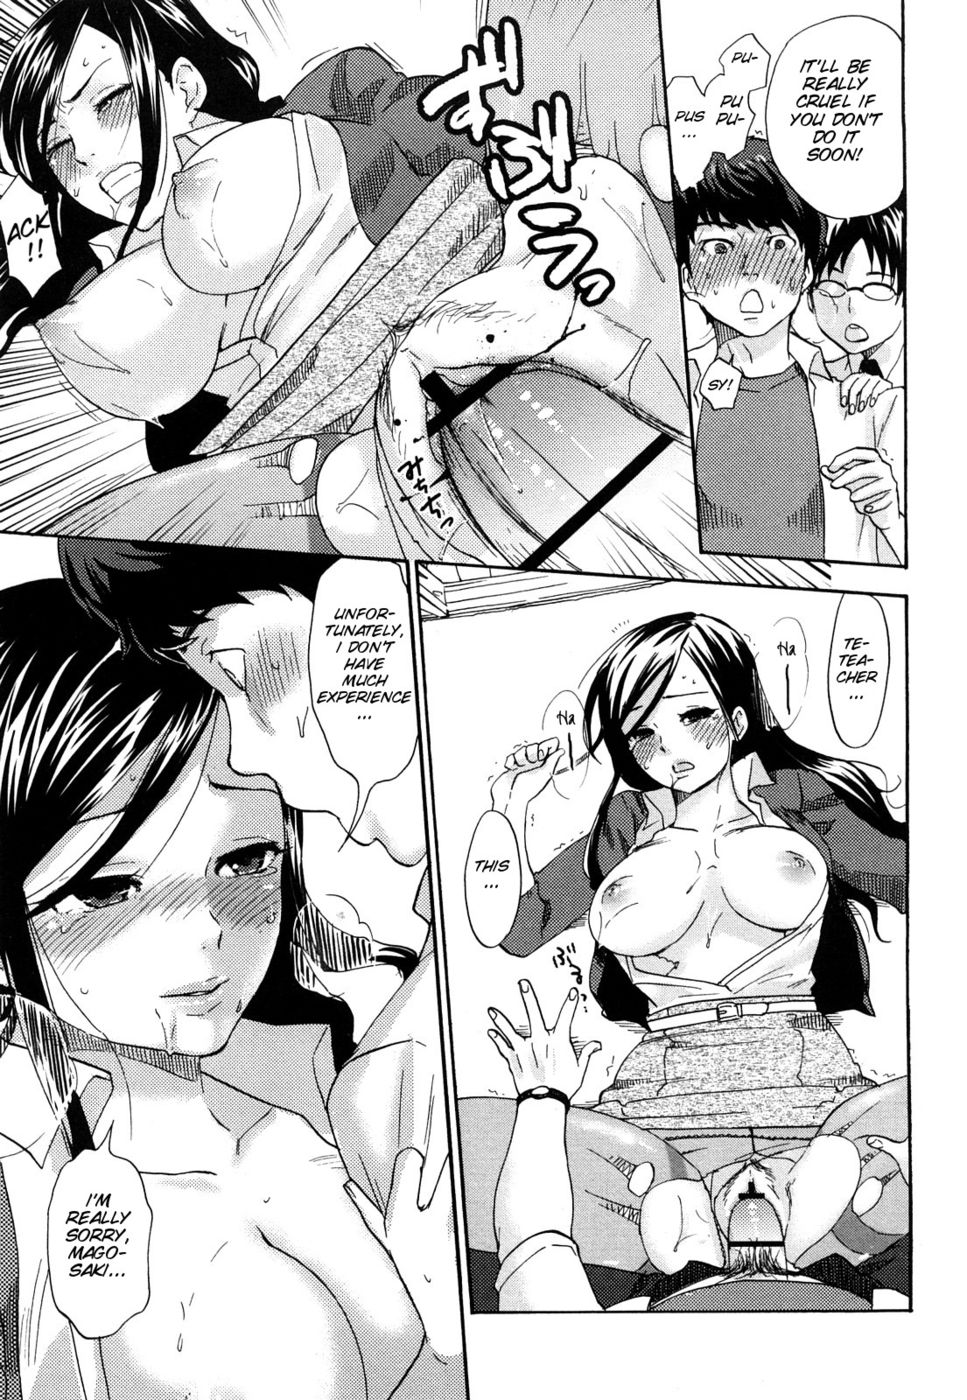 Hentai Manga Comic-How About A Cold-blooded Female Teacher ?-Read-9